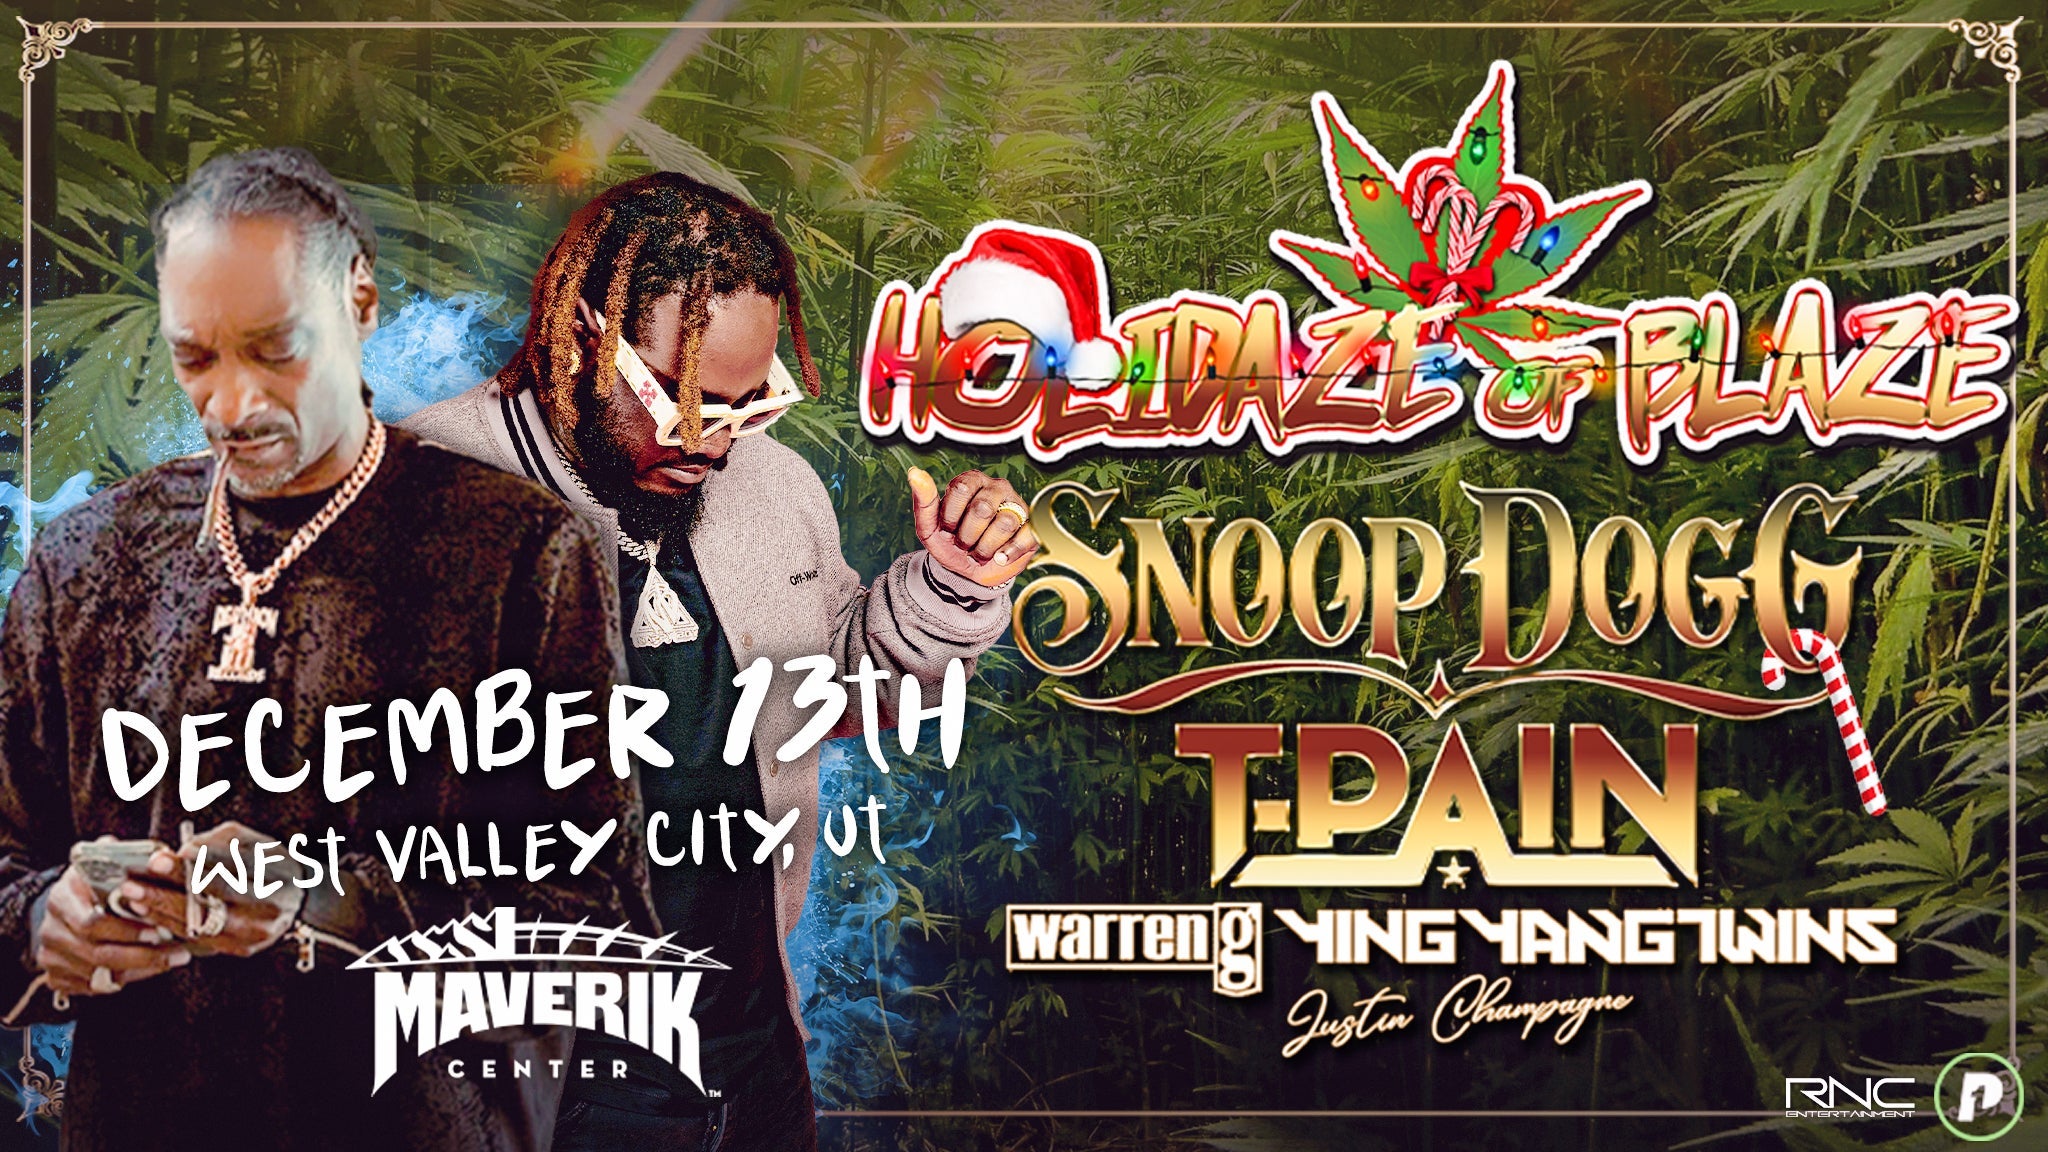 Snoop Dogg's Holidaze of Blaze presale code for approved tickets in West Valley City